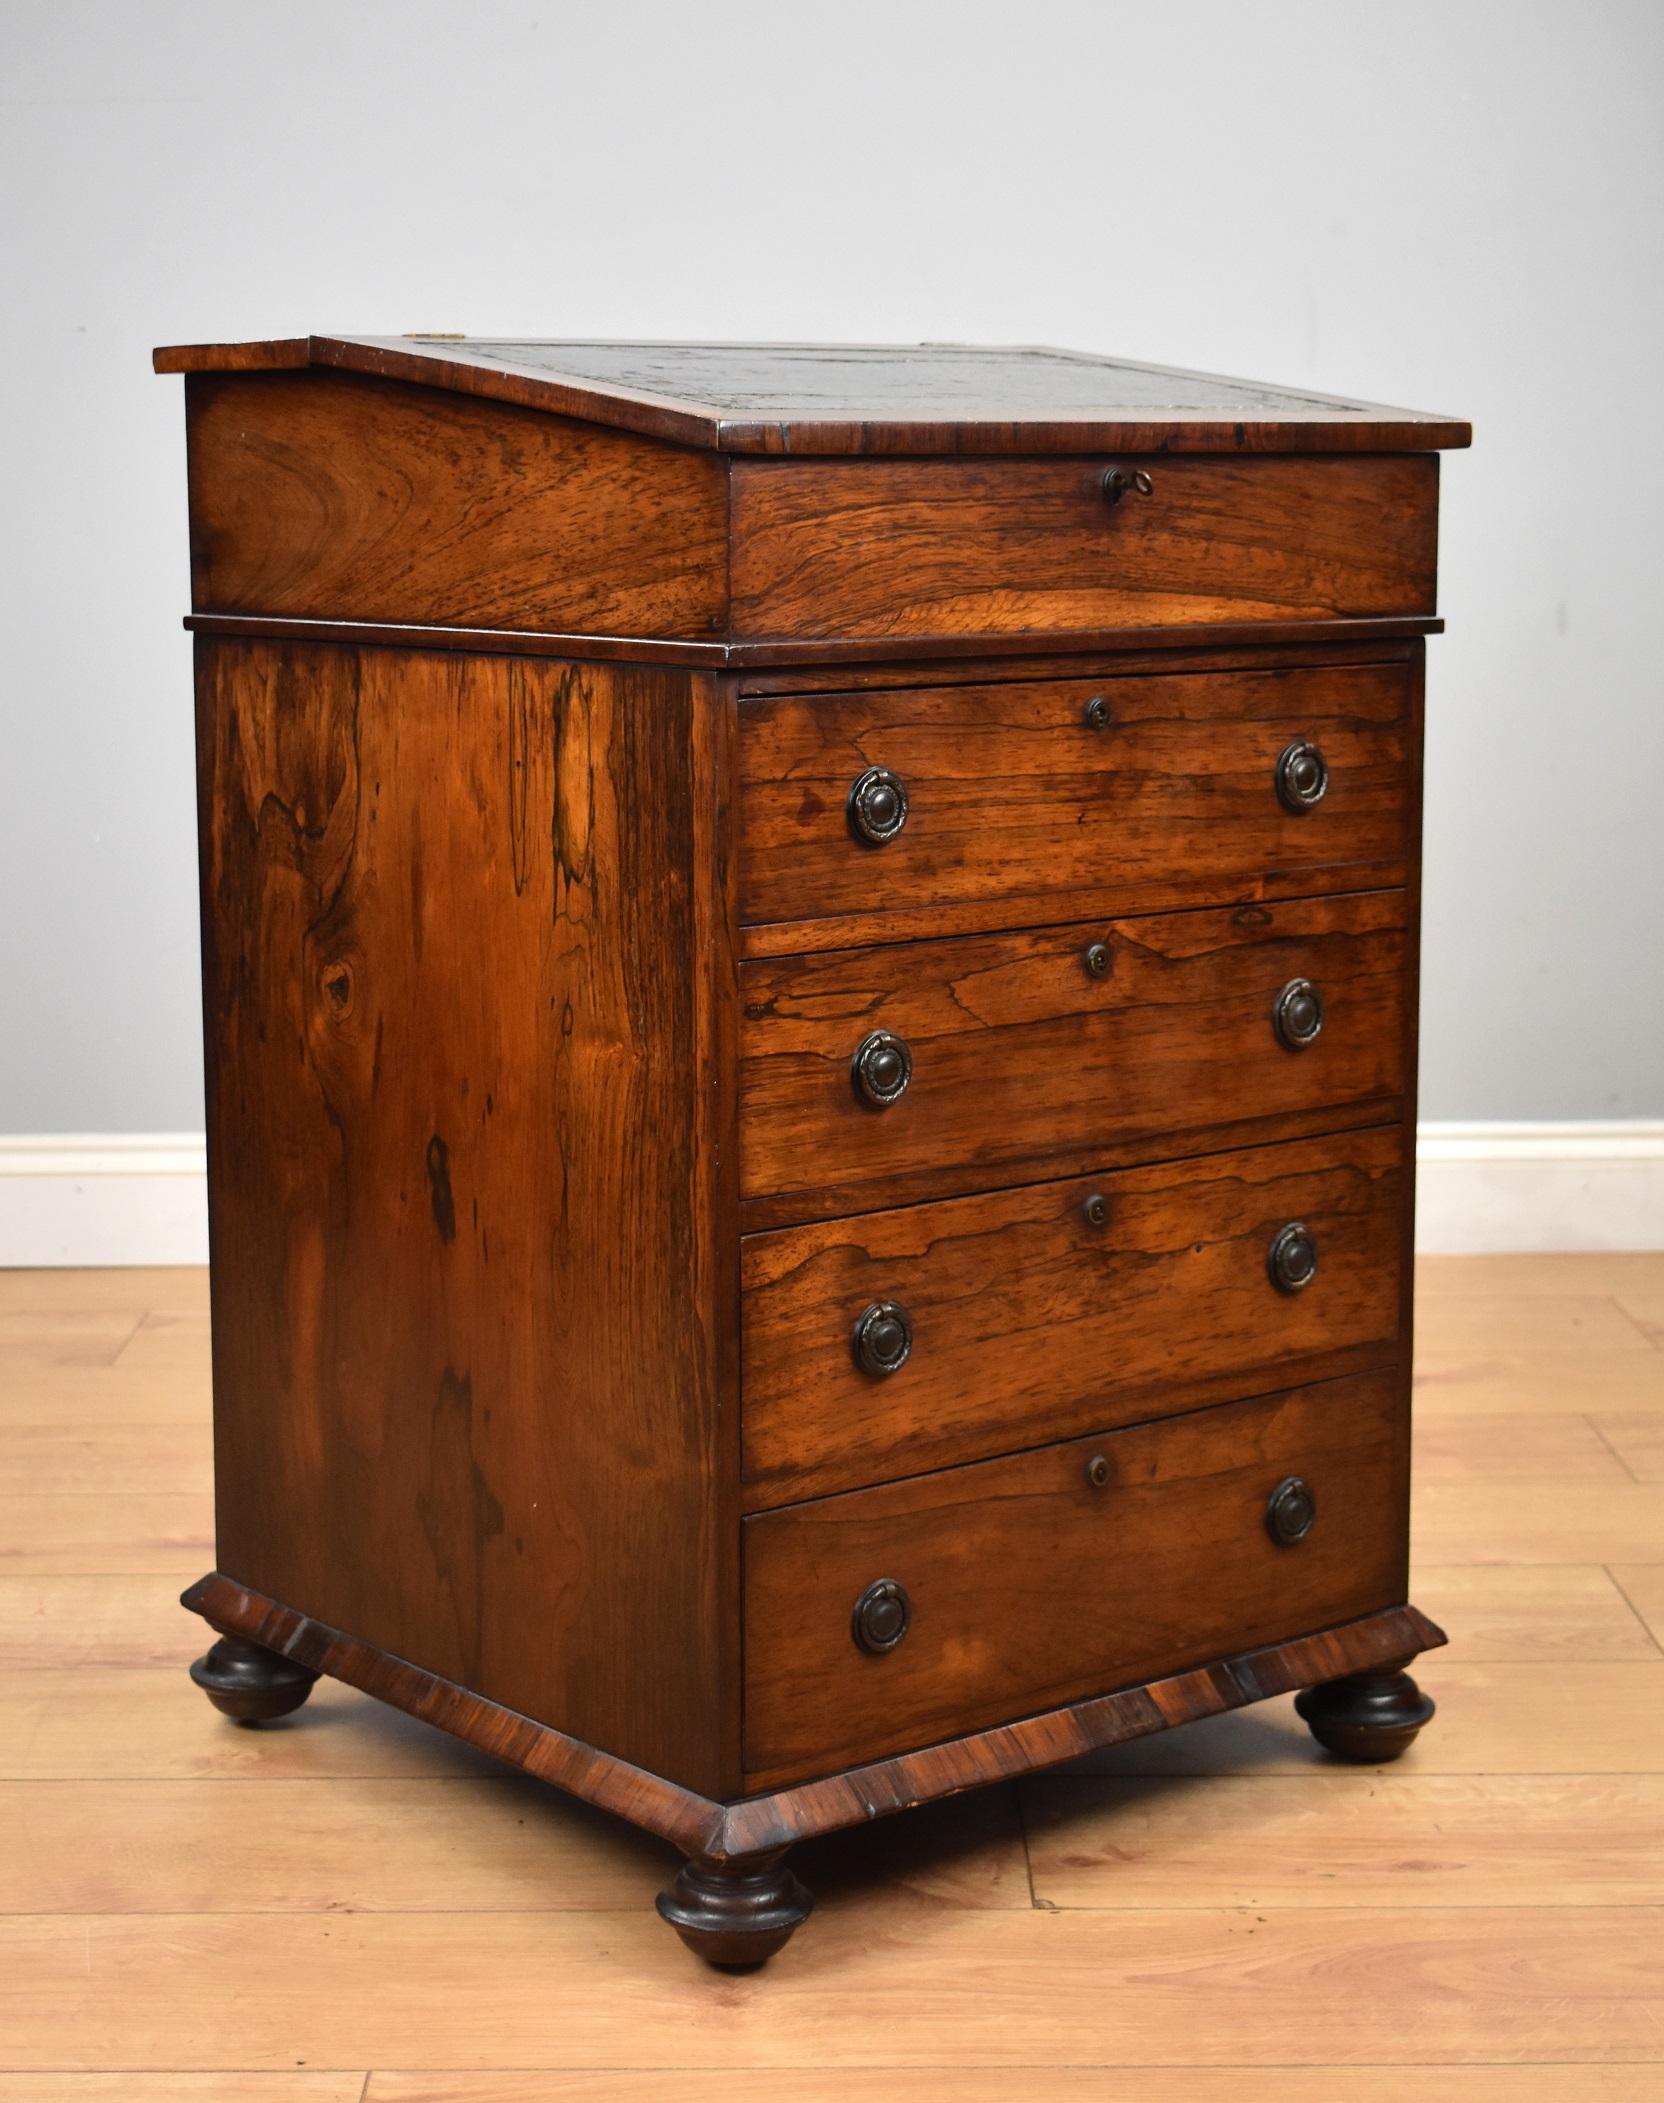 A good quality Regency rosewood davenport, the top inset with an antique leather, opening to reveal storage space and a single drawer. Below this there are four graduated drawers, each with brass handles and escutcheons. One side has dummy drawers